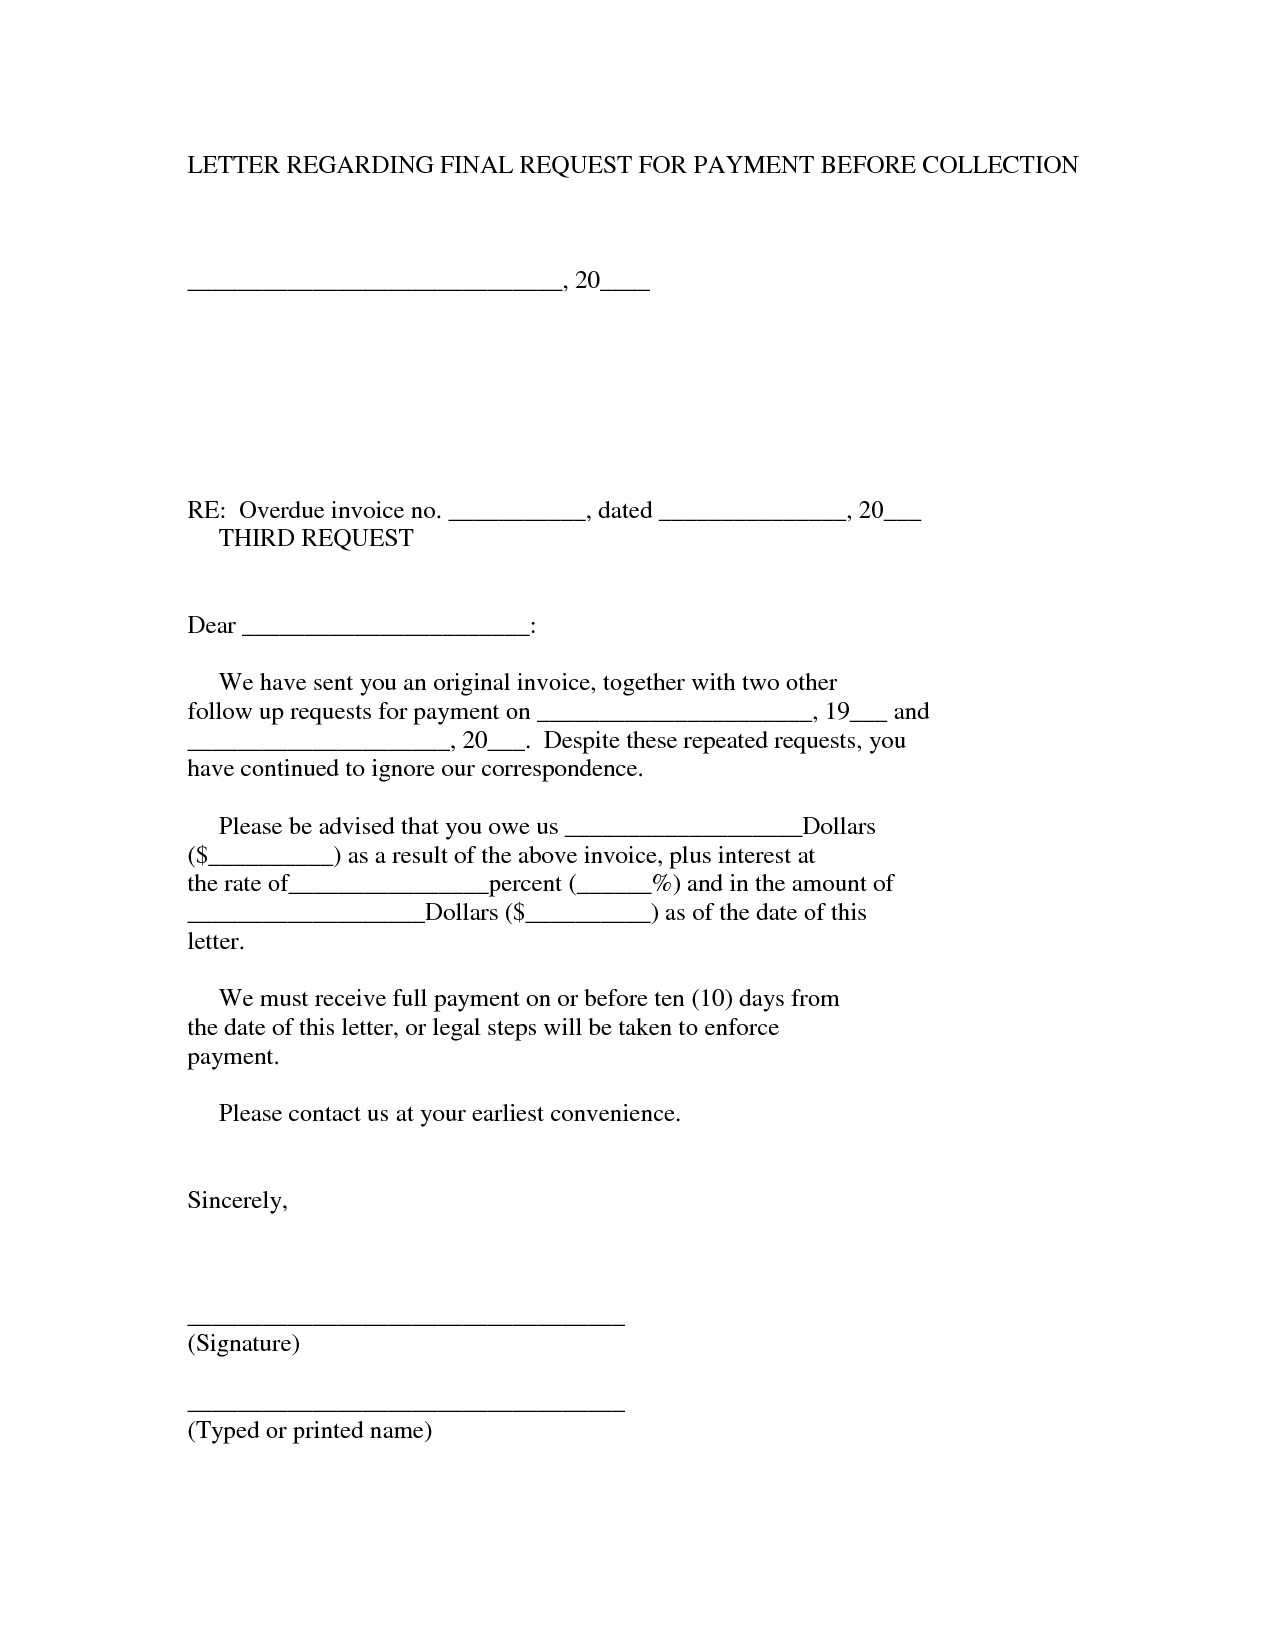 17 best photos of final payment letter final payment demand invoice letter for payment